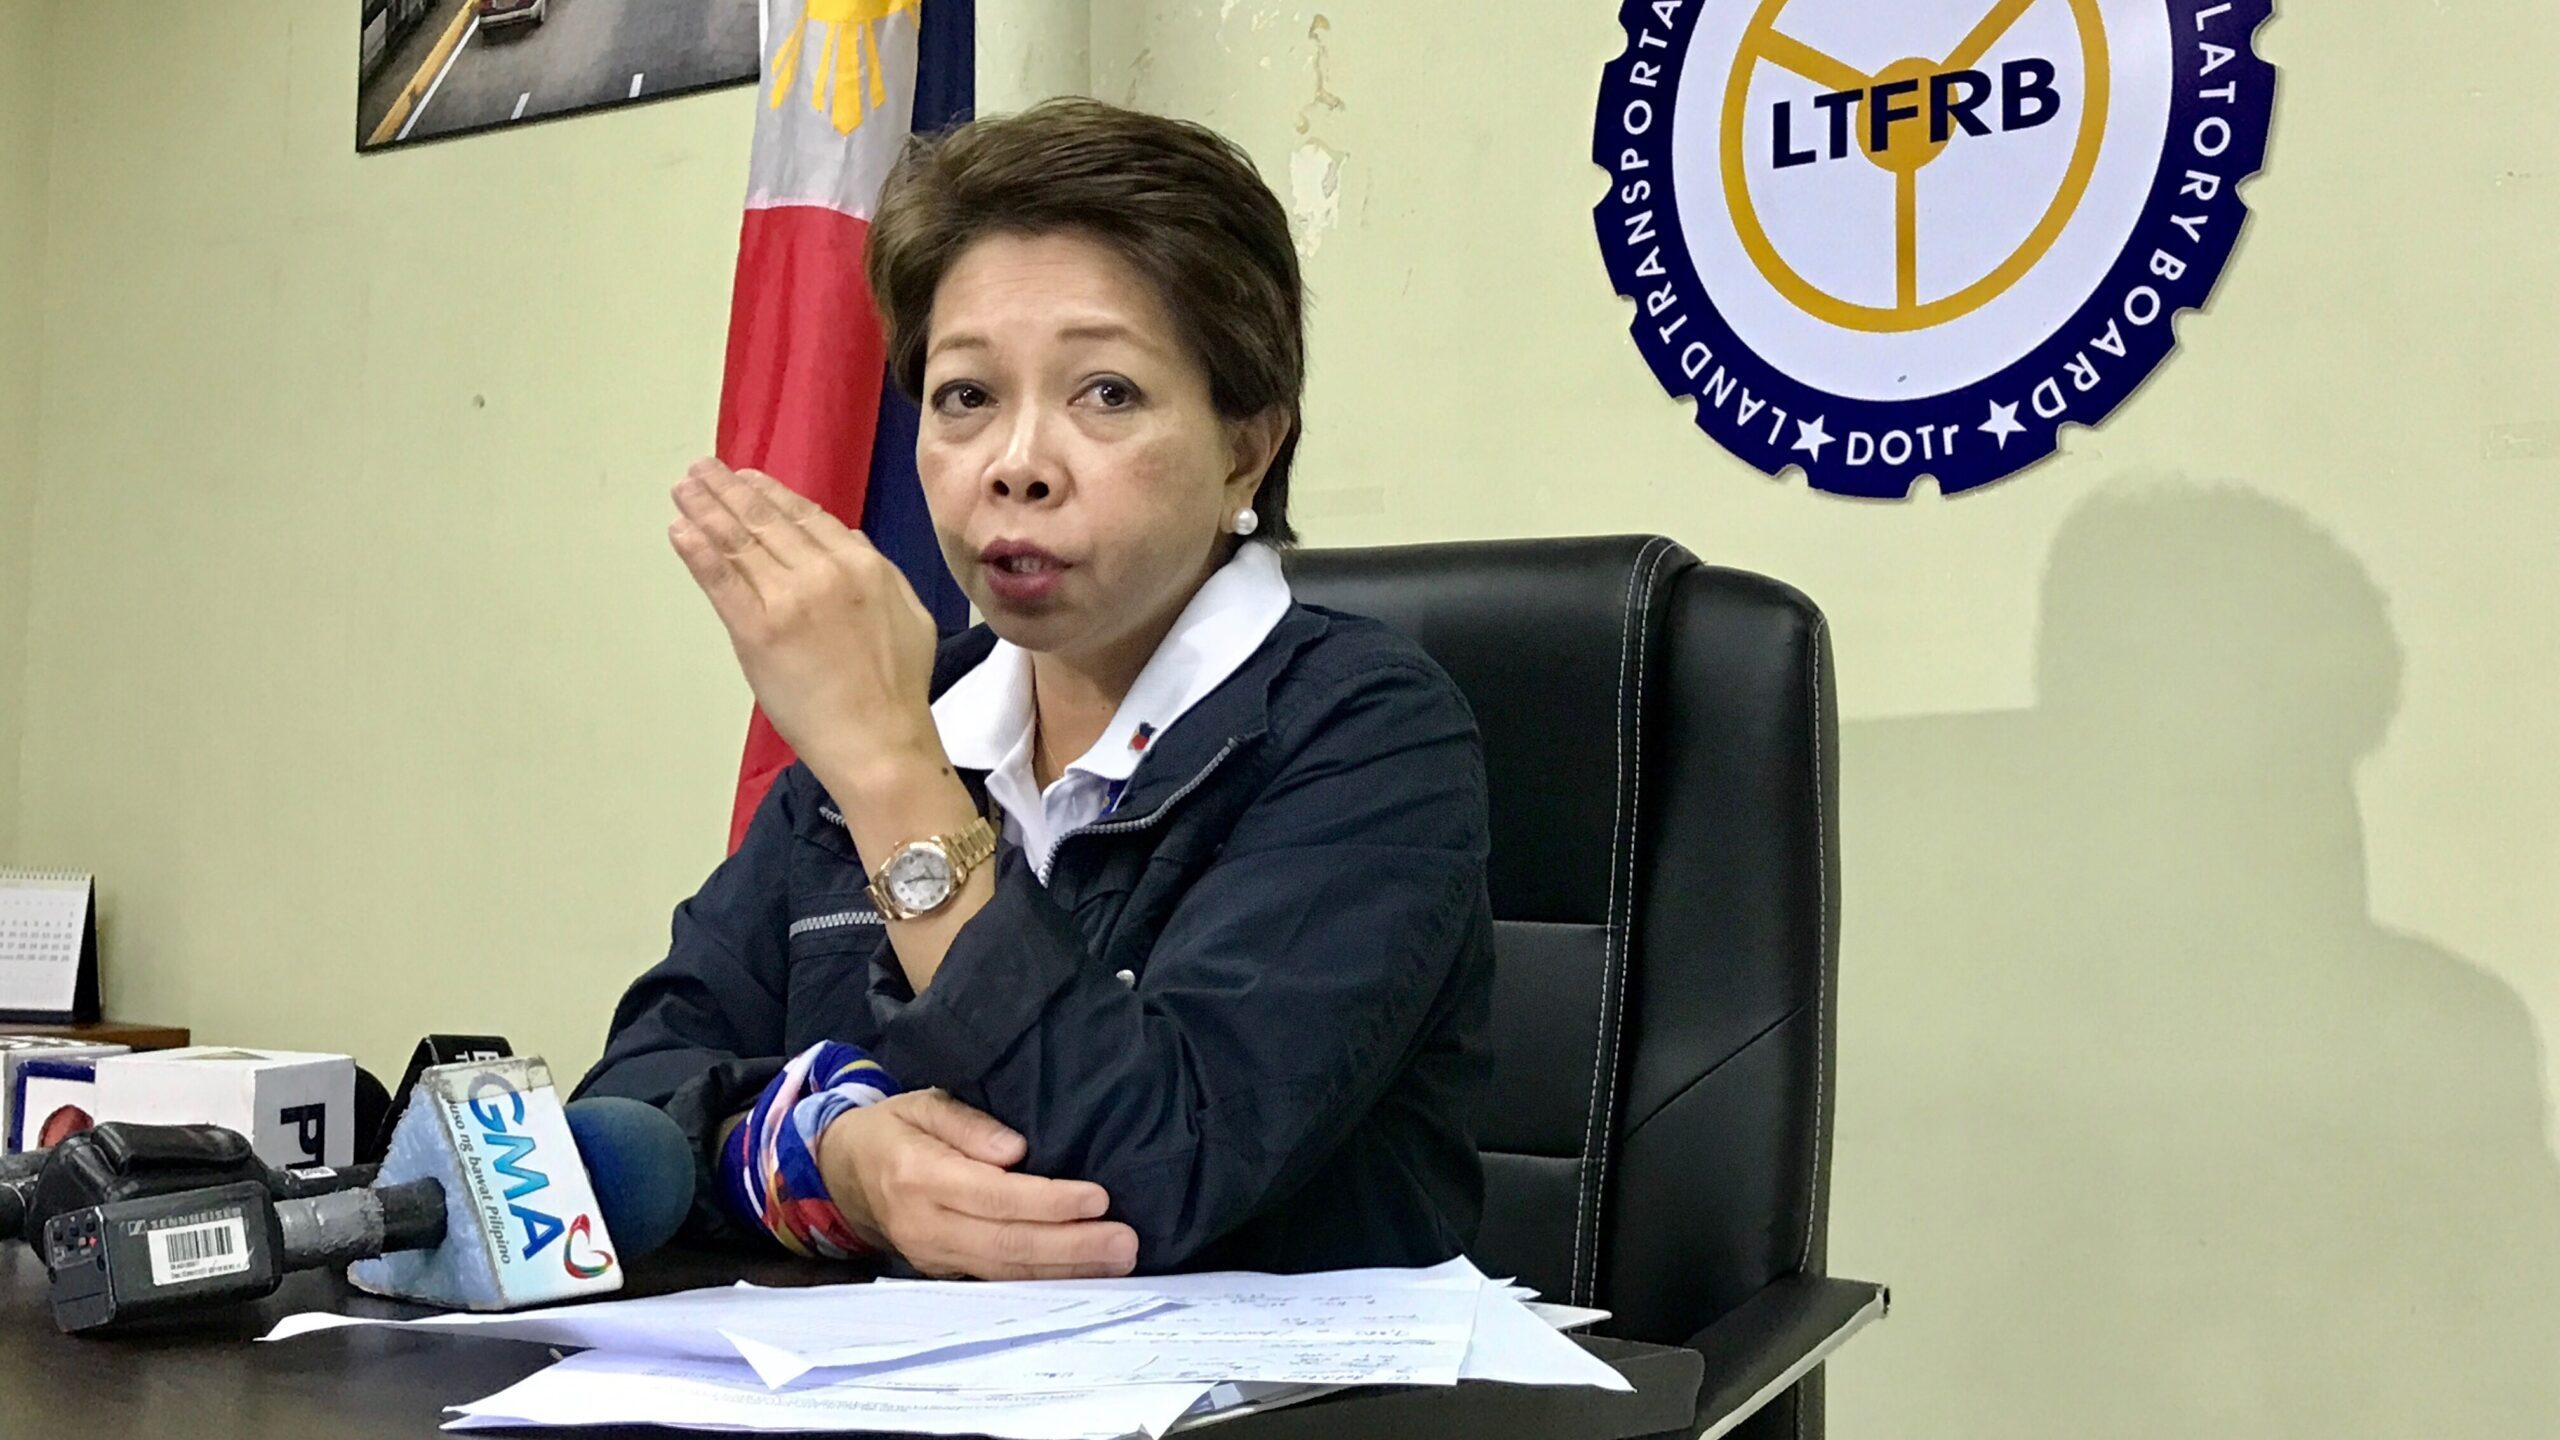 LTFRB will not process new franchise applications for ride-hailing services